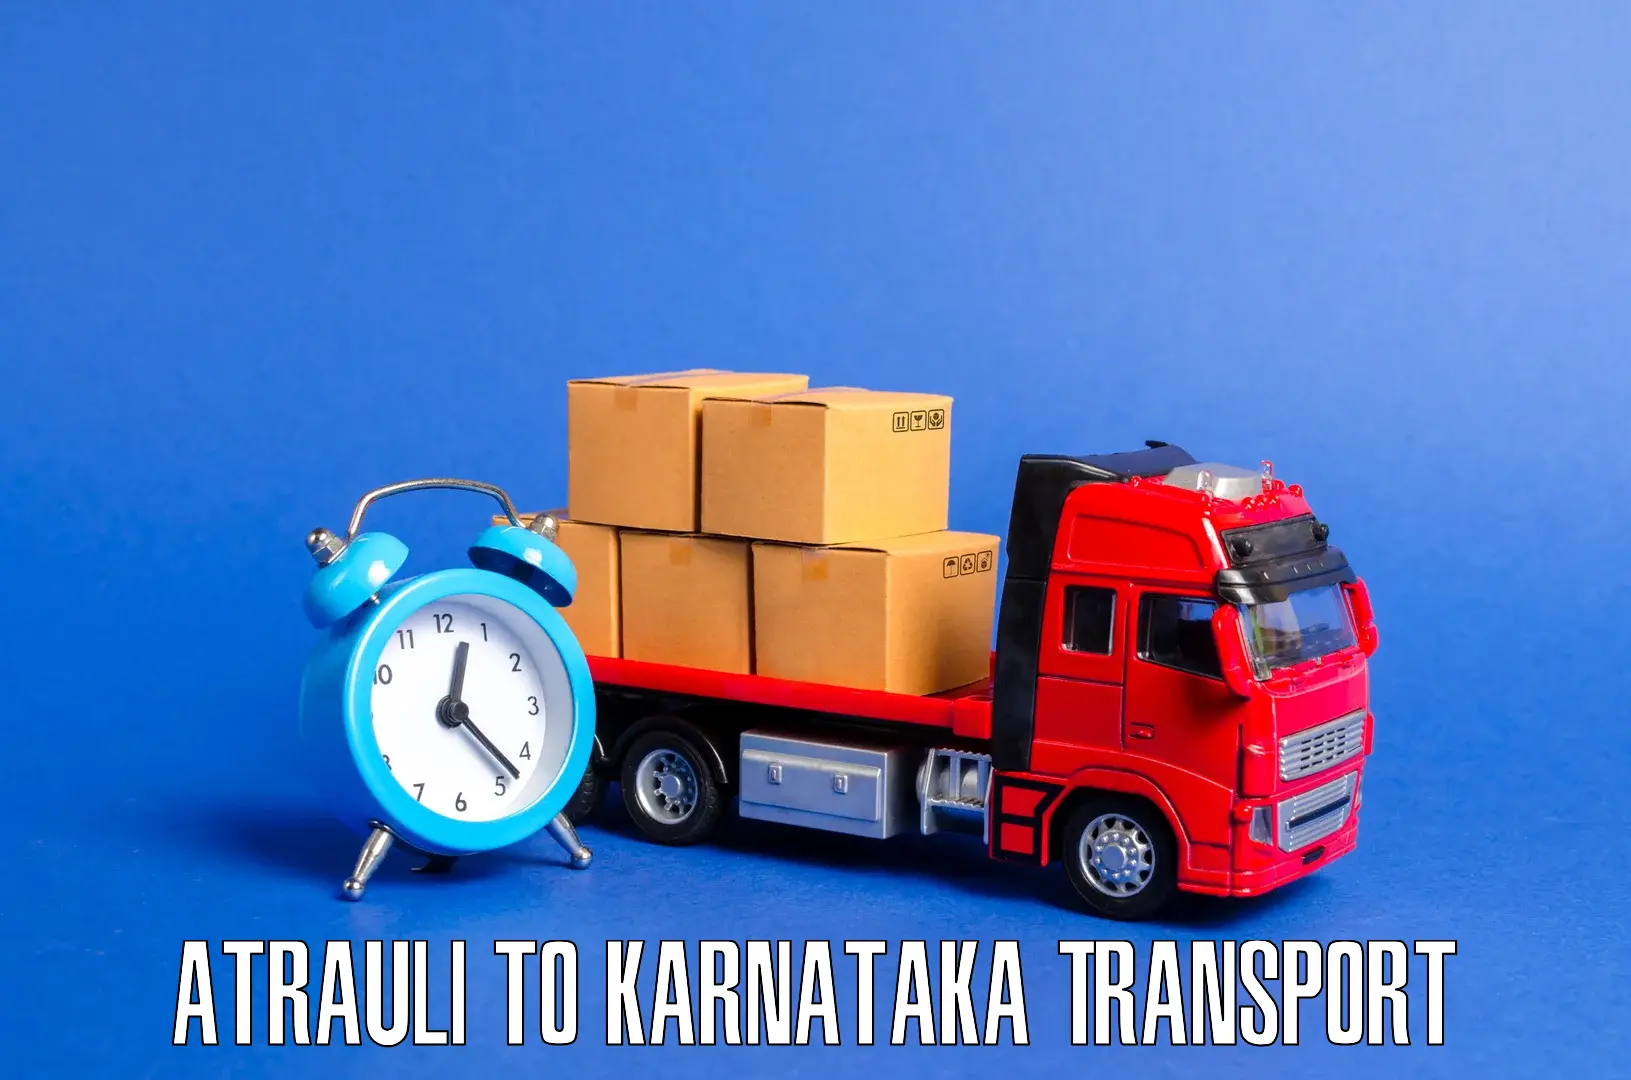 All India transport service Atrauli to Manipal Academy of Higher Education